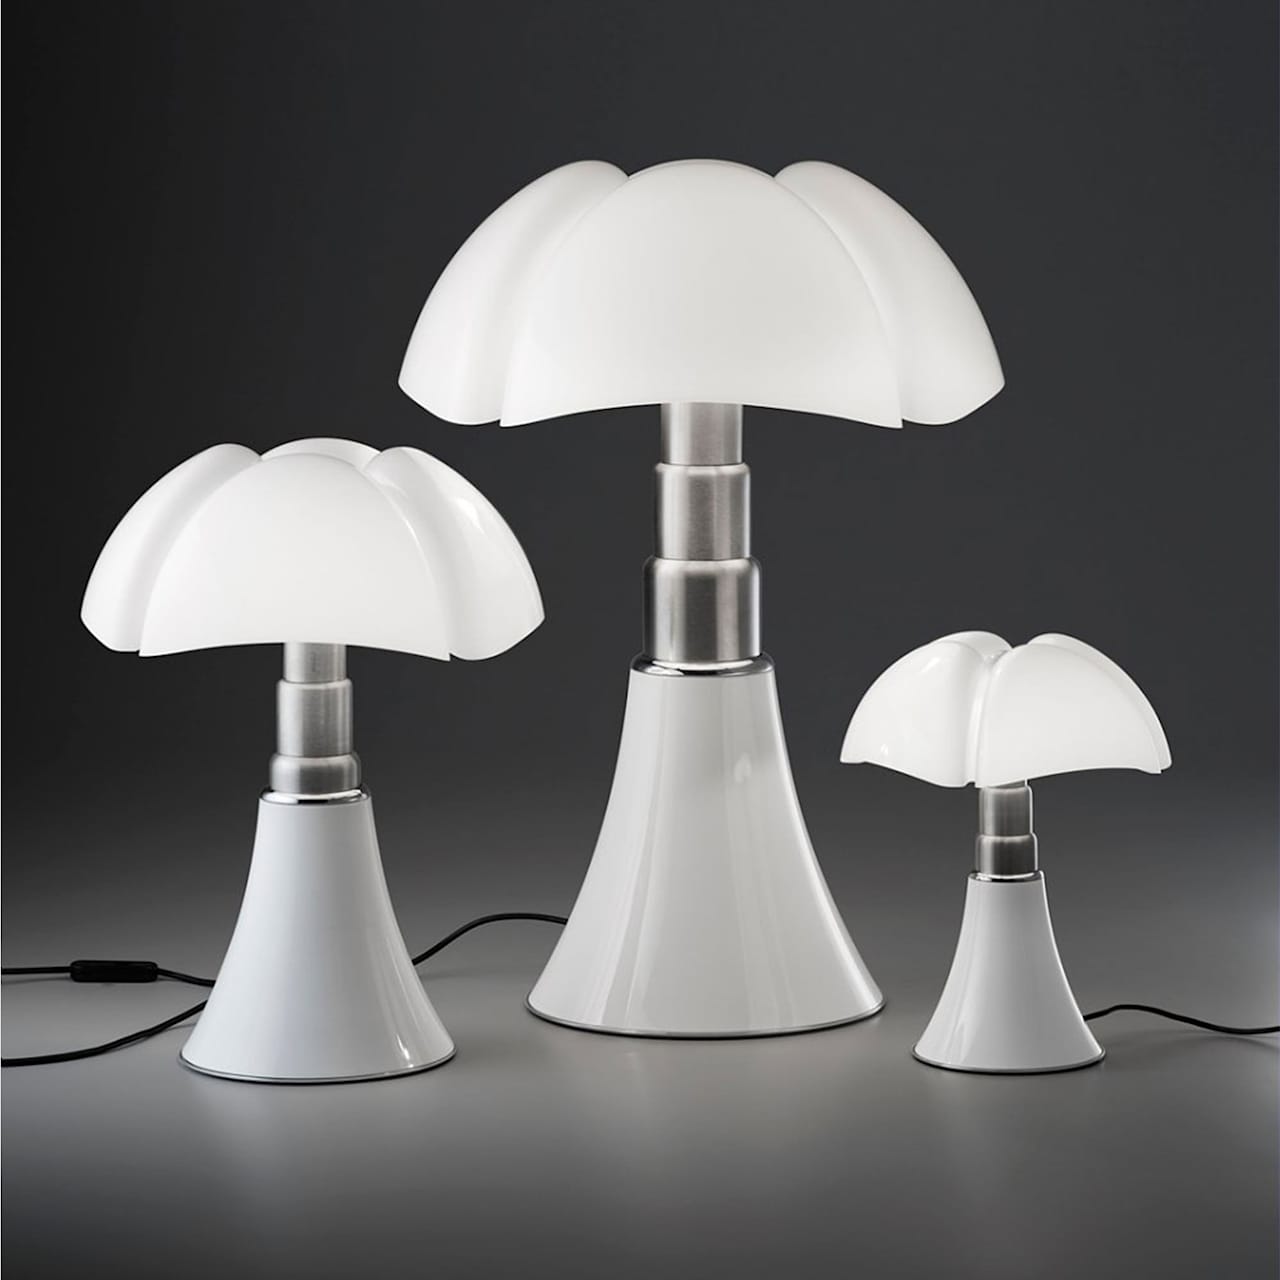 Pipistrello Table Lamp - Ikke Dimmable